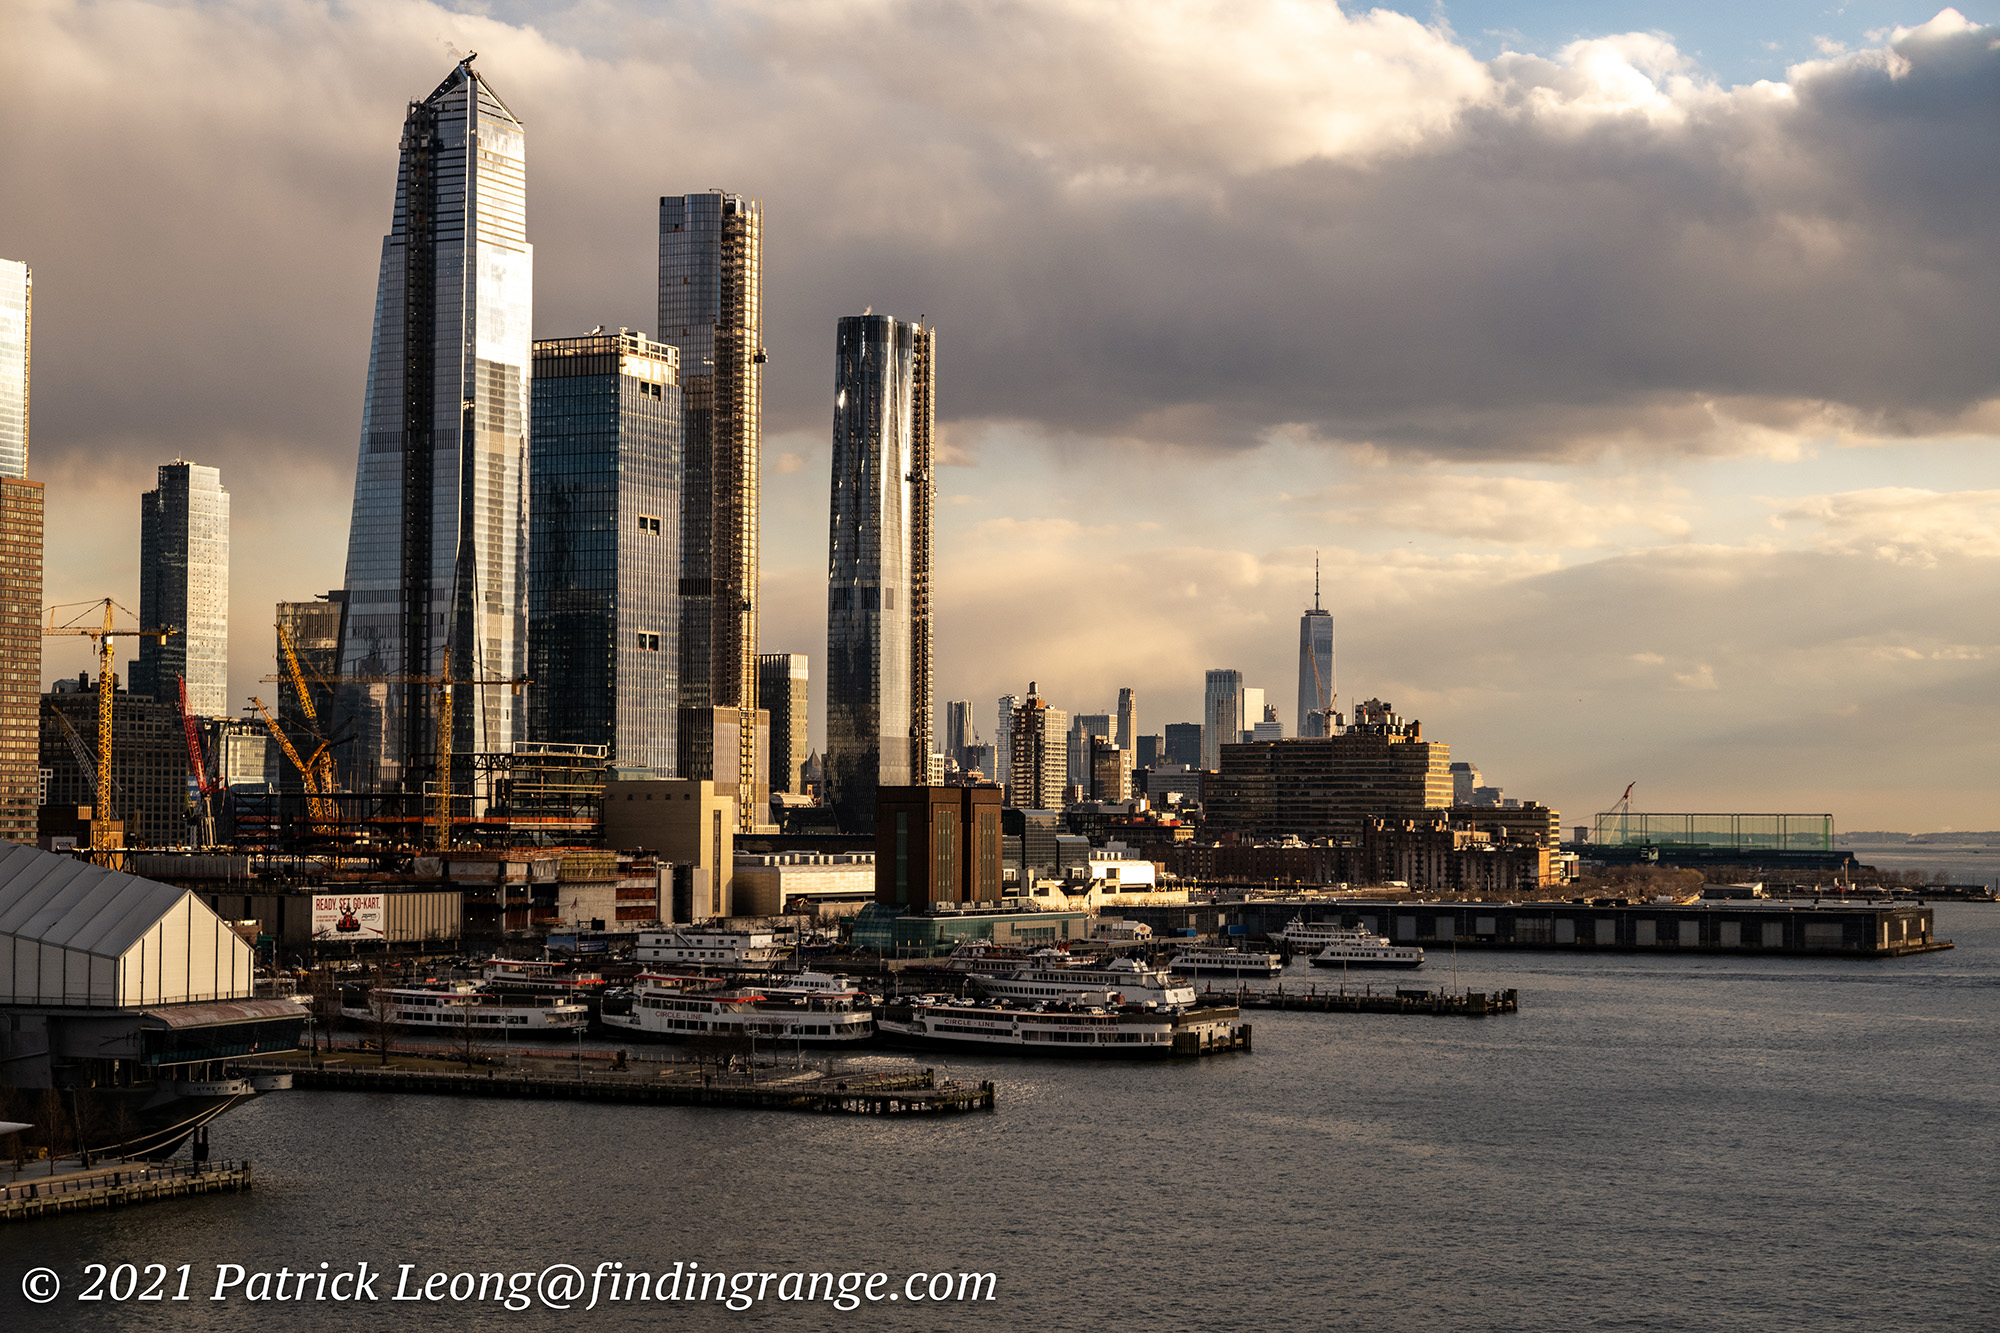 Fuji XF 18-55mm f2.8-4 and X-T3: Afternoon Cityscape Shots of NYC